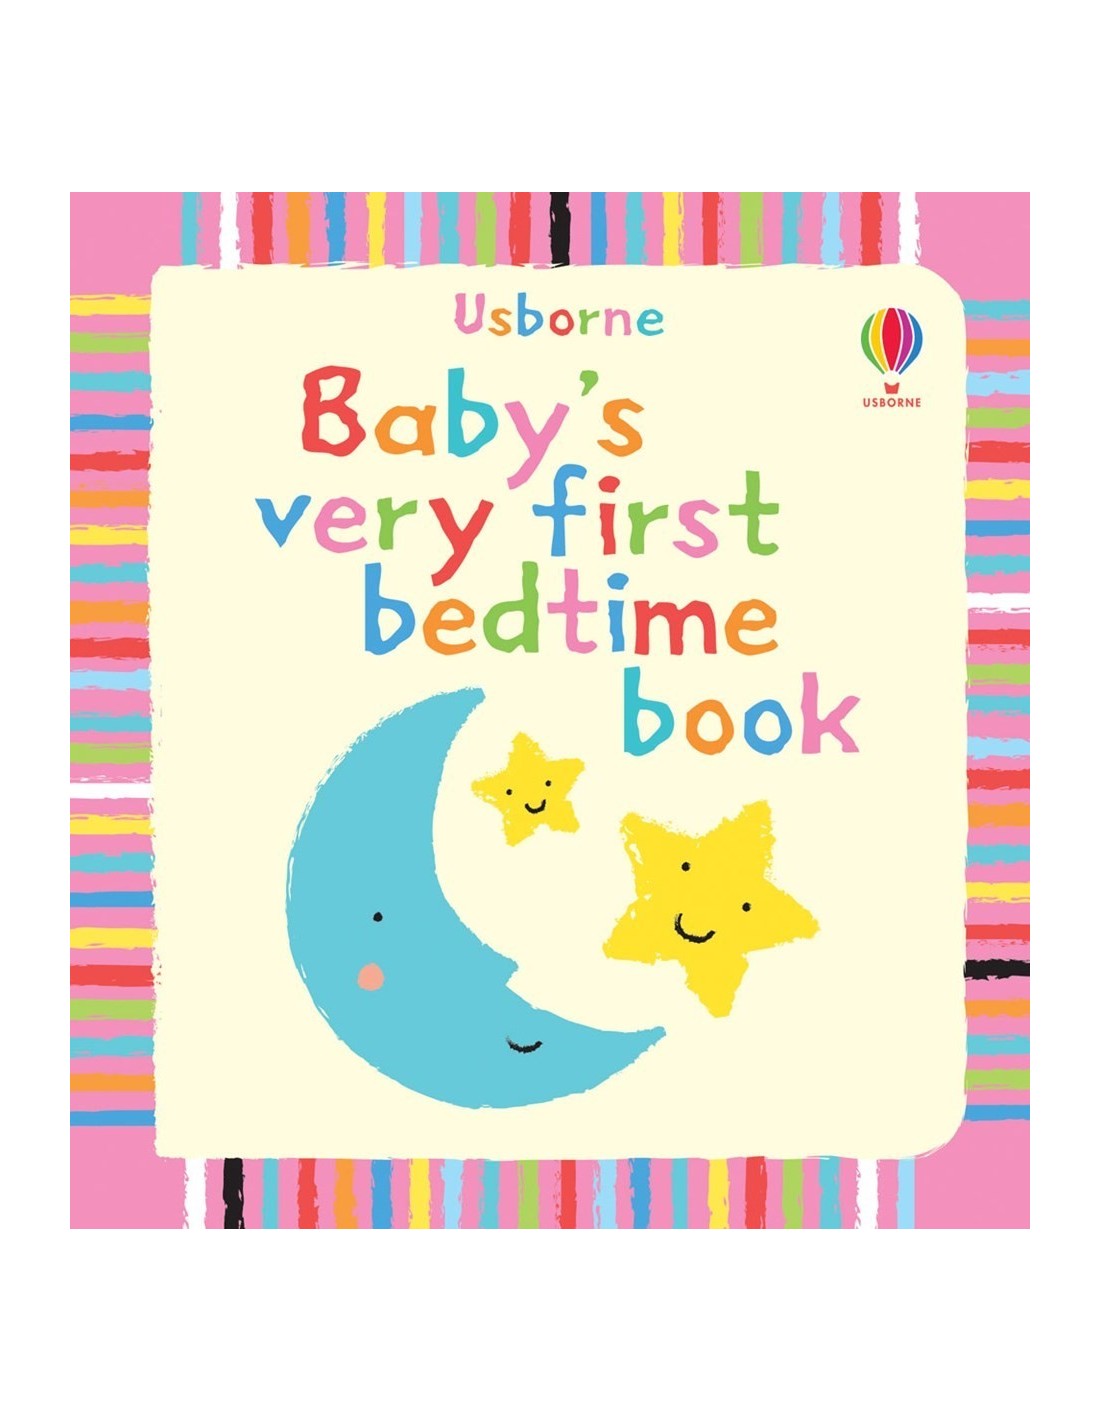 Baby's very first bedtime book